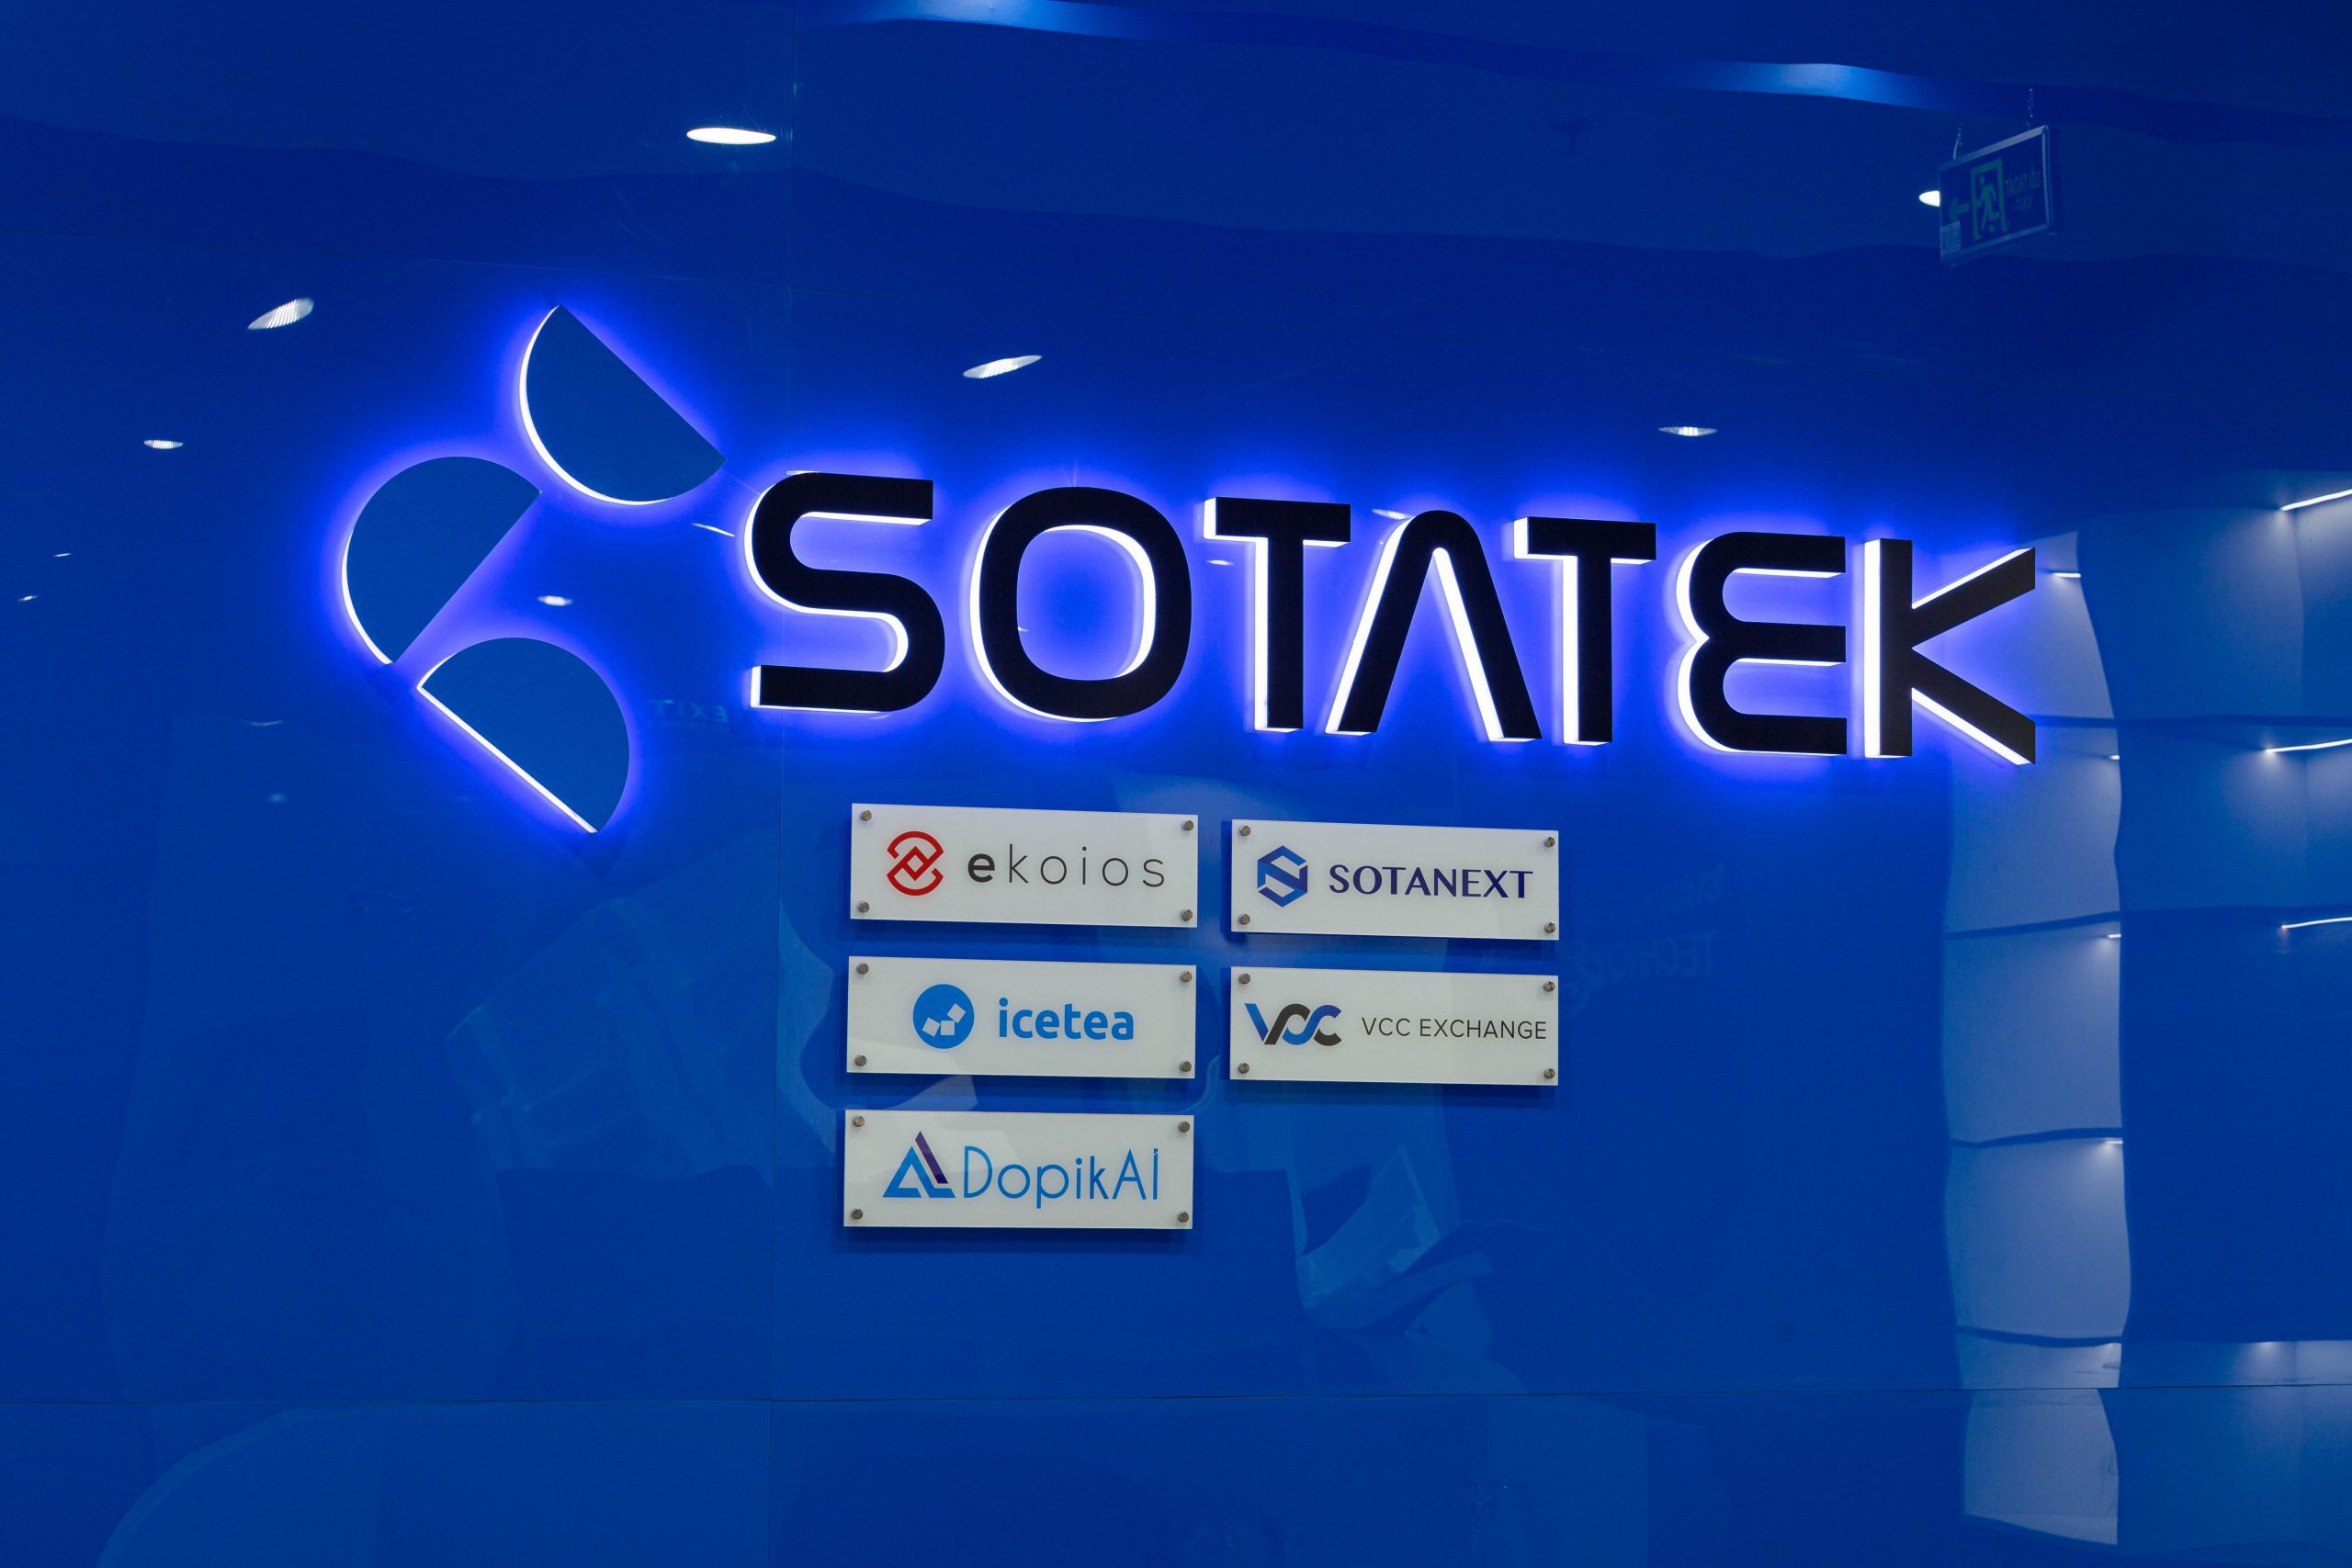 SotaTek is in charge of connecting, consulting, and developing software for businesses.